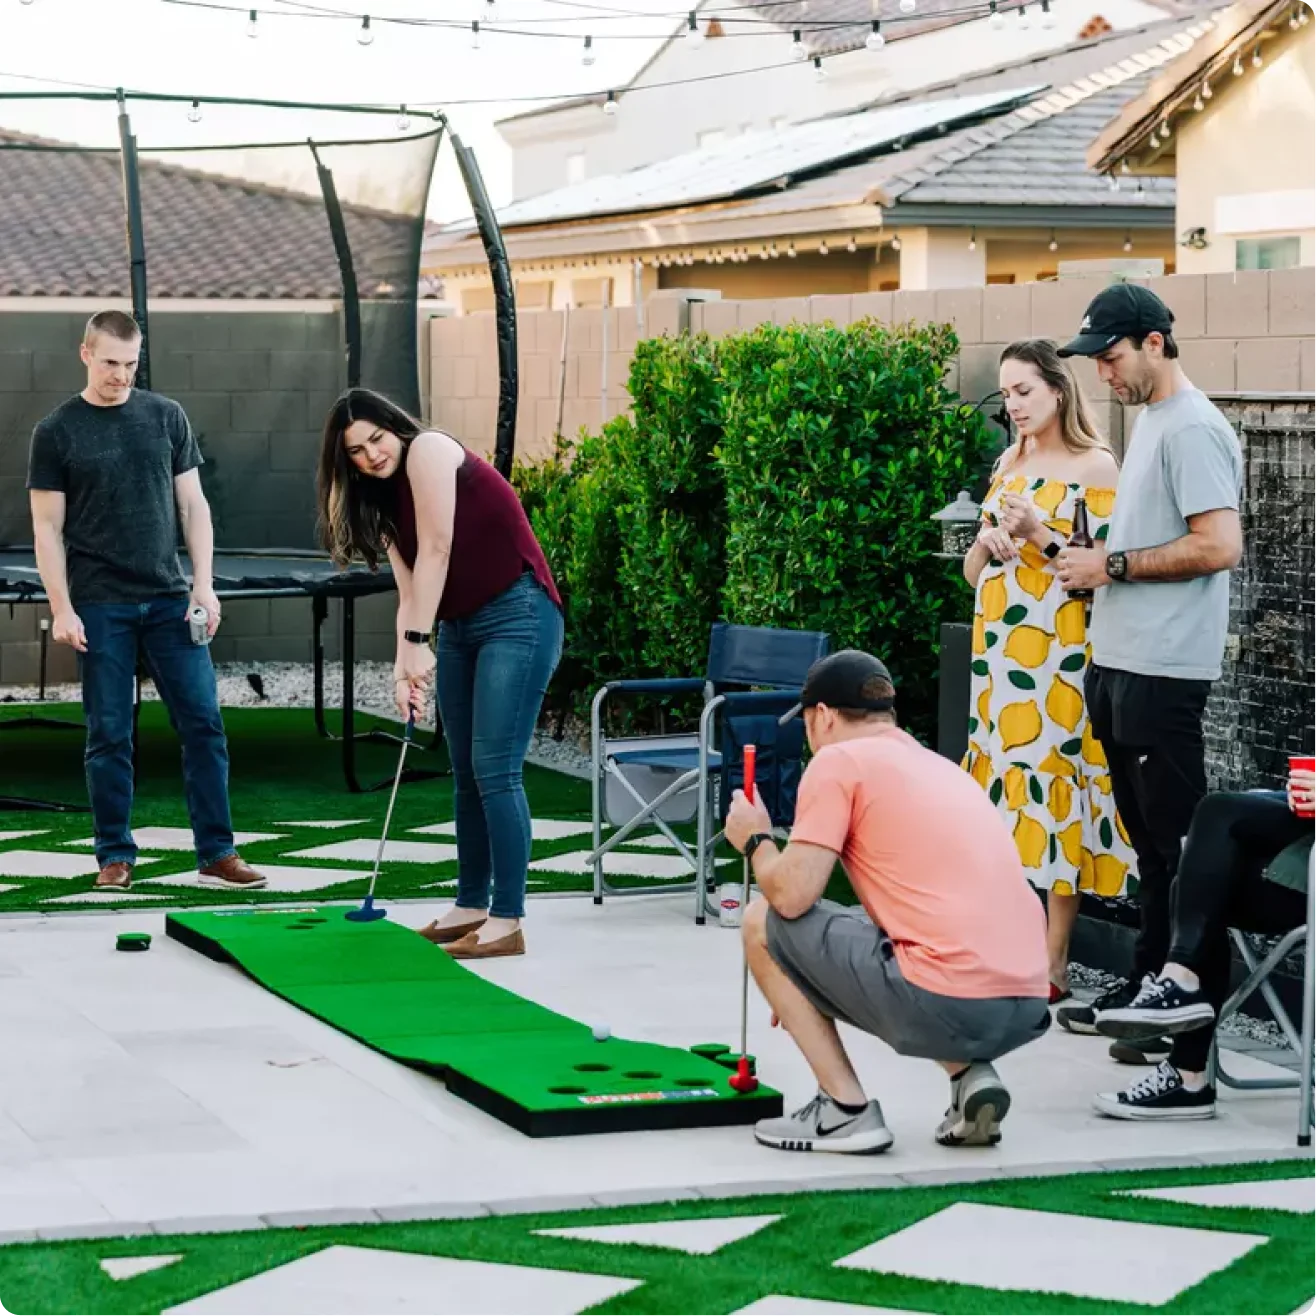 PutterBall Backyard Game - Best Golf Putting Green For Indoors & Outdoors